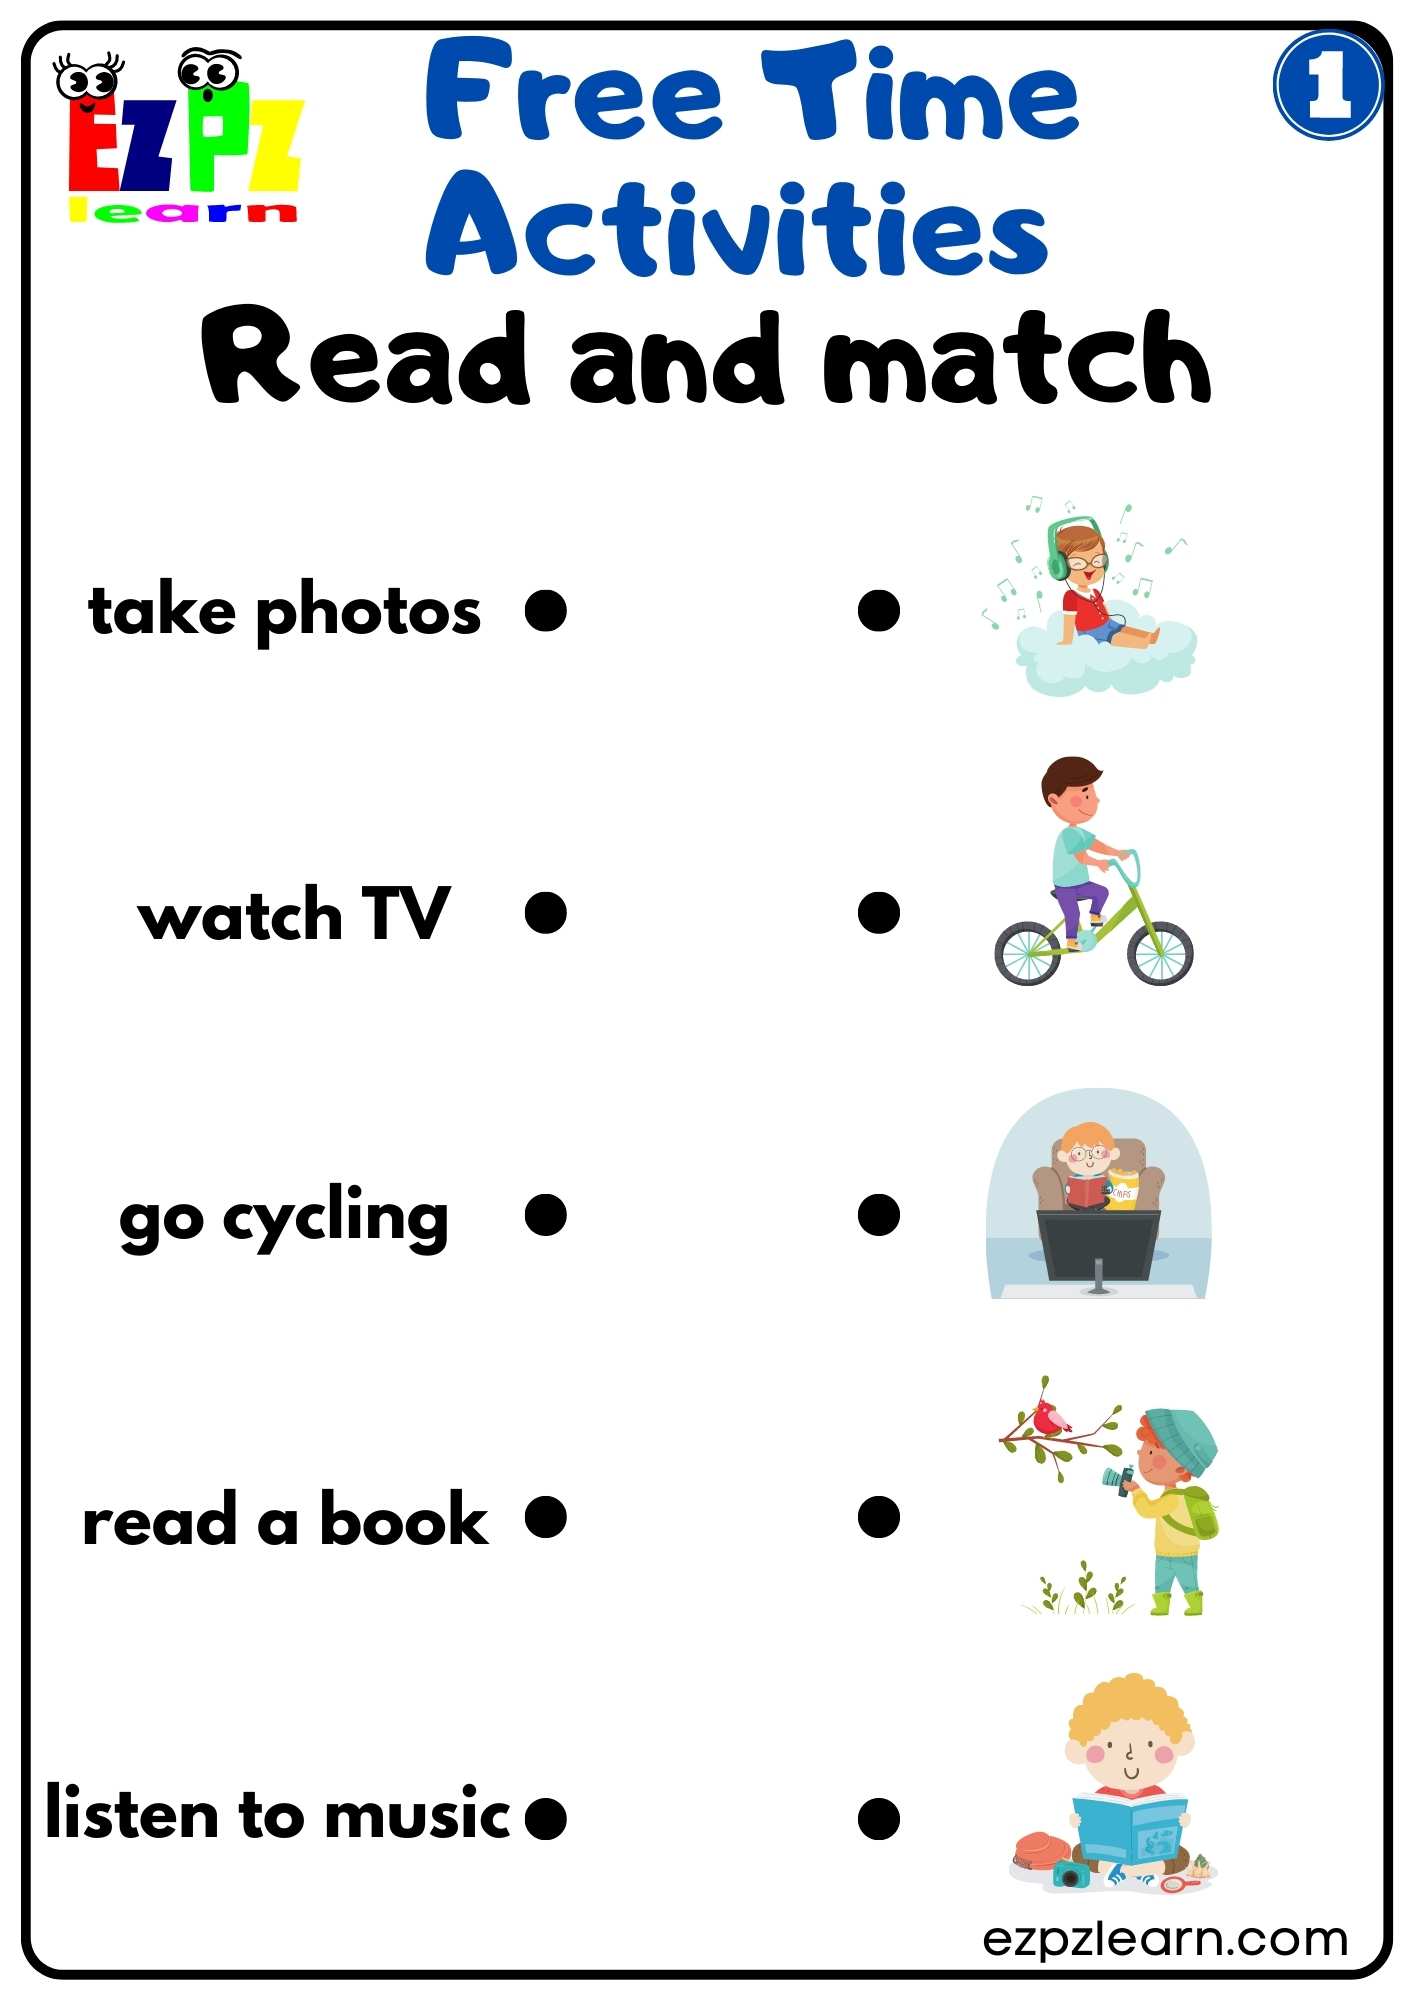 Fun Free Time Activities For Students